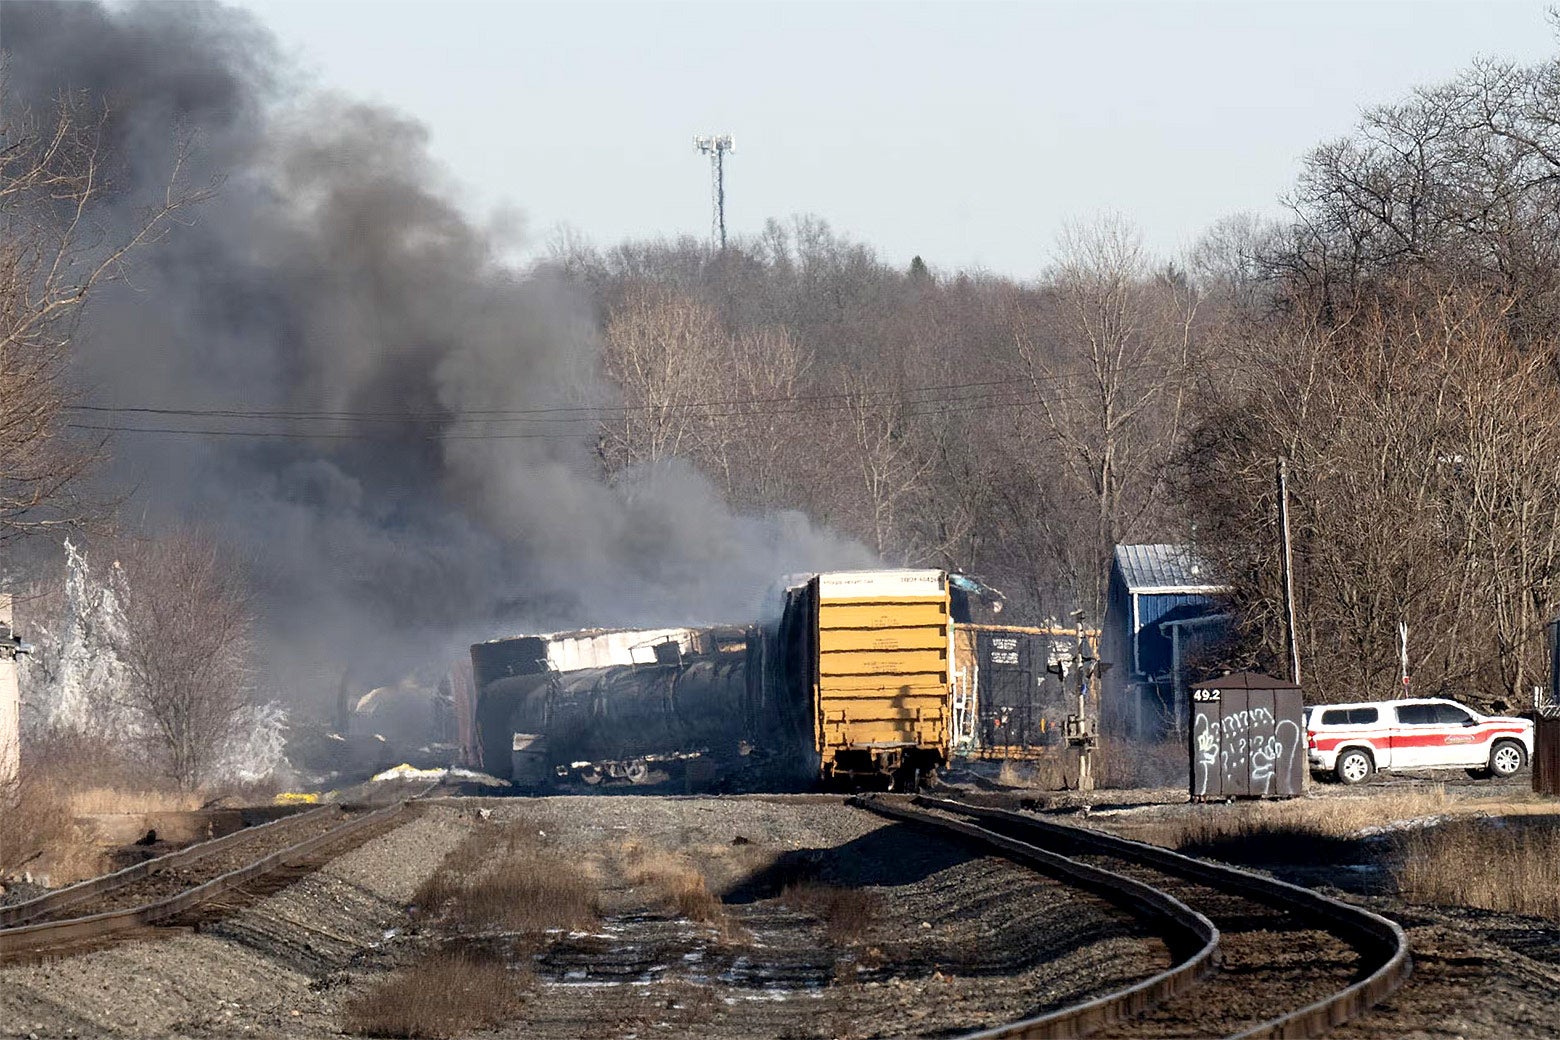 Two train tracks cut through the center of the photo, and black smoke rises from a derailed cargo train, laying on its side across the tracks.